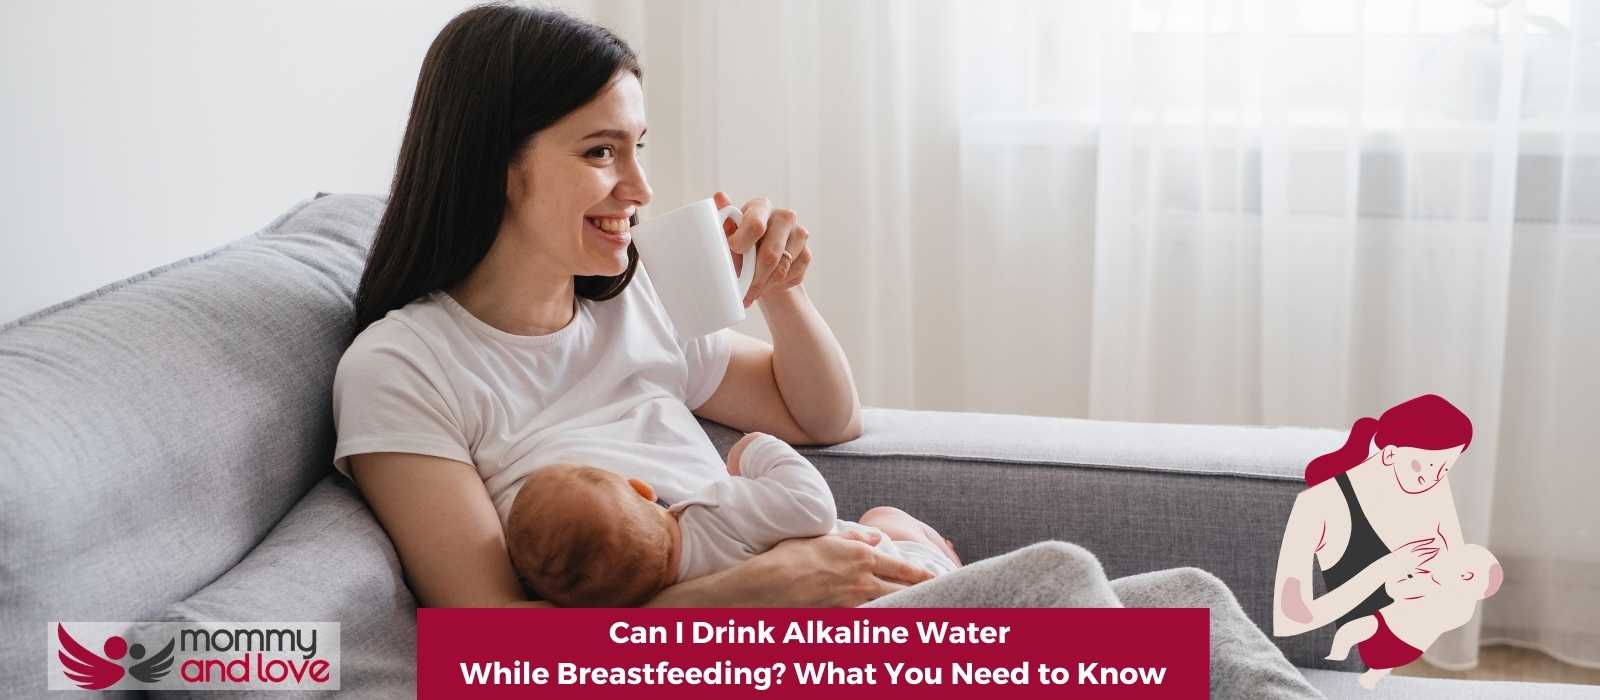 Can I Drink Alkaline Water While Breastfeeding What You Need to Know